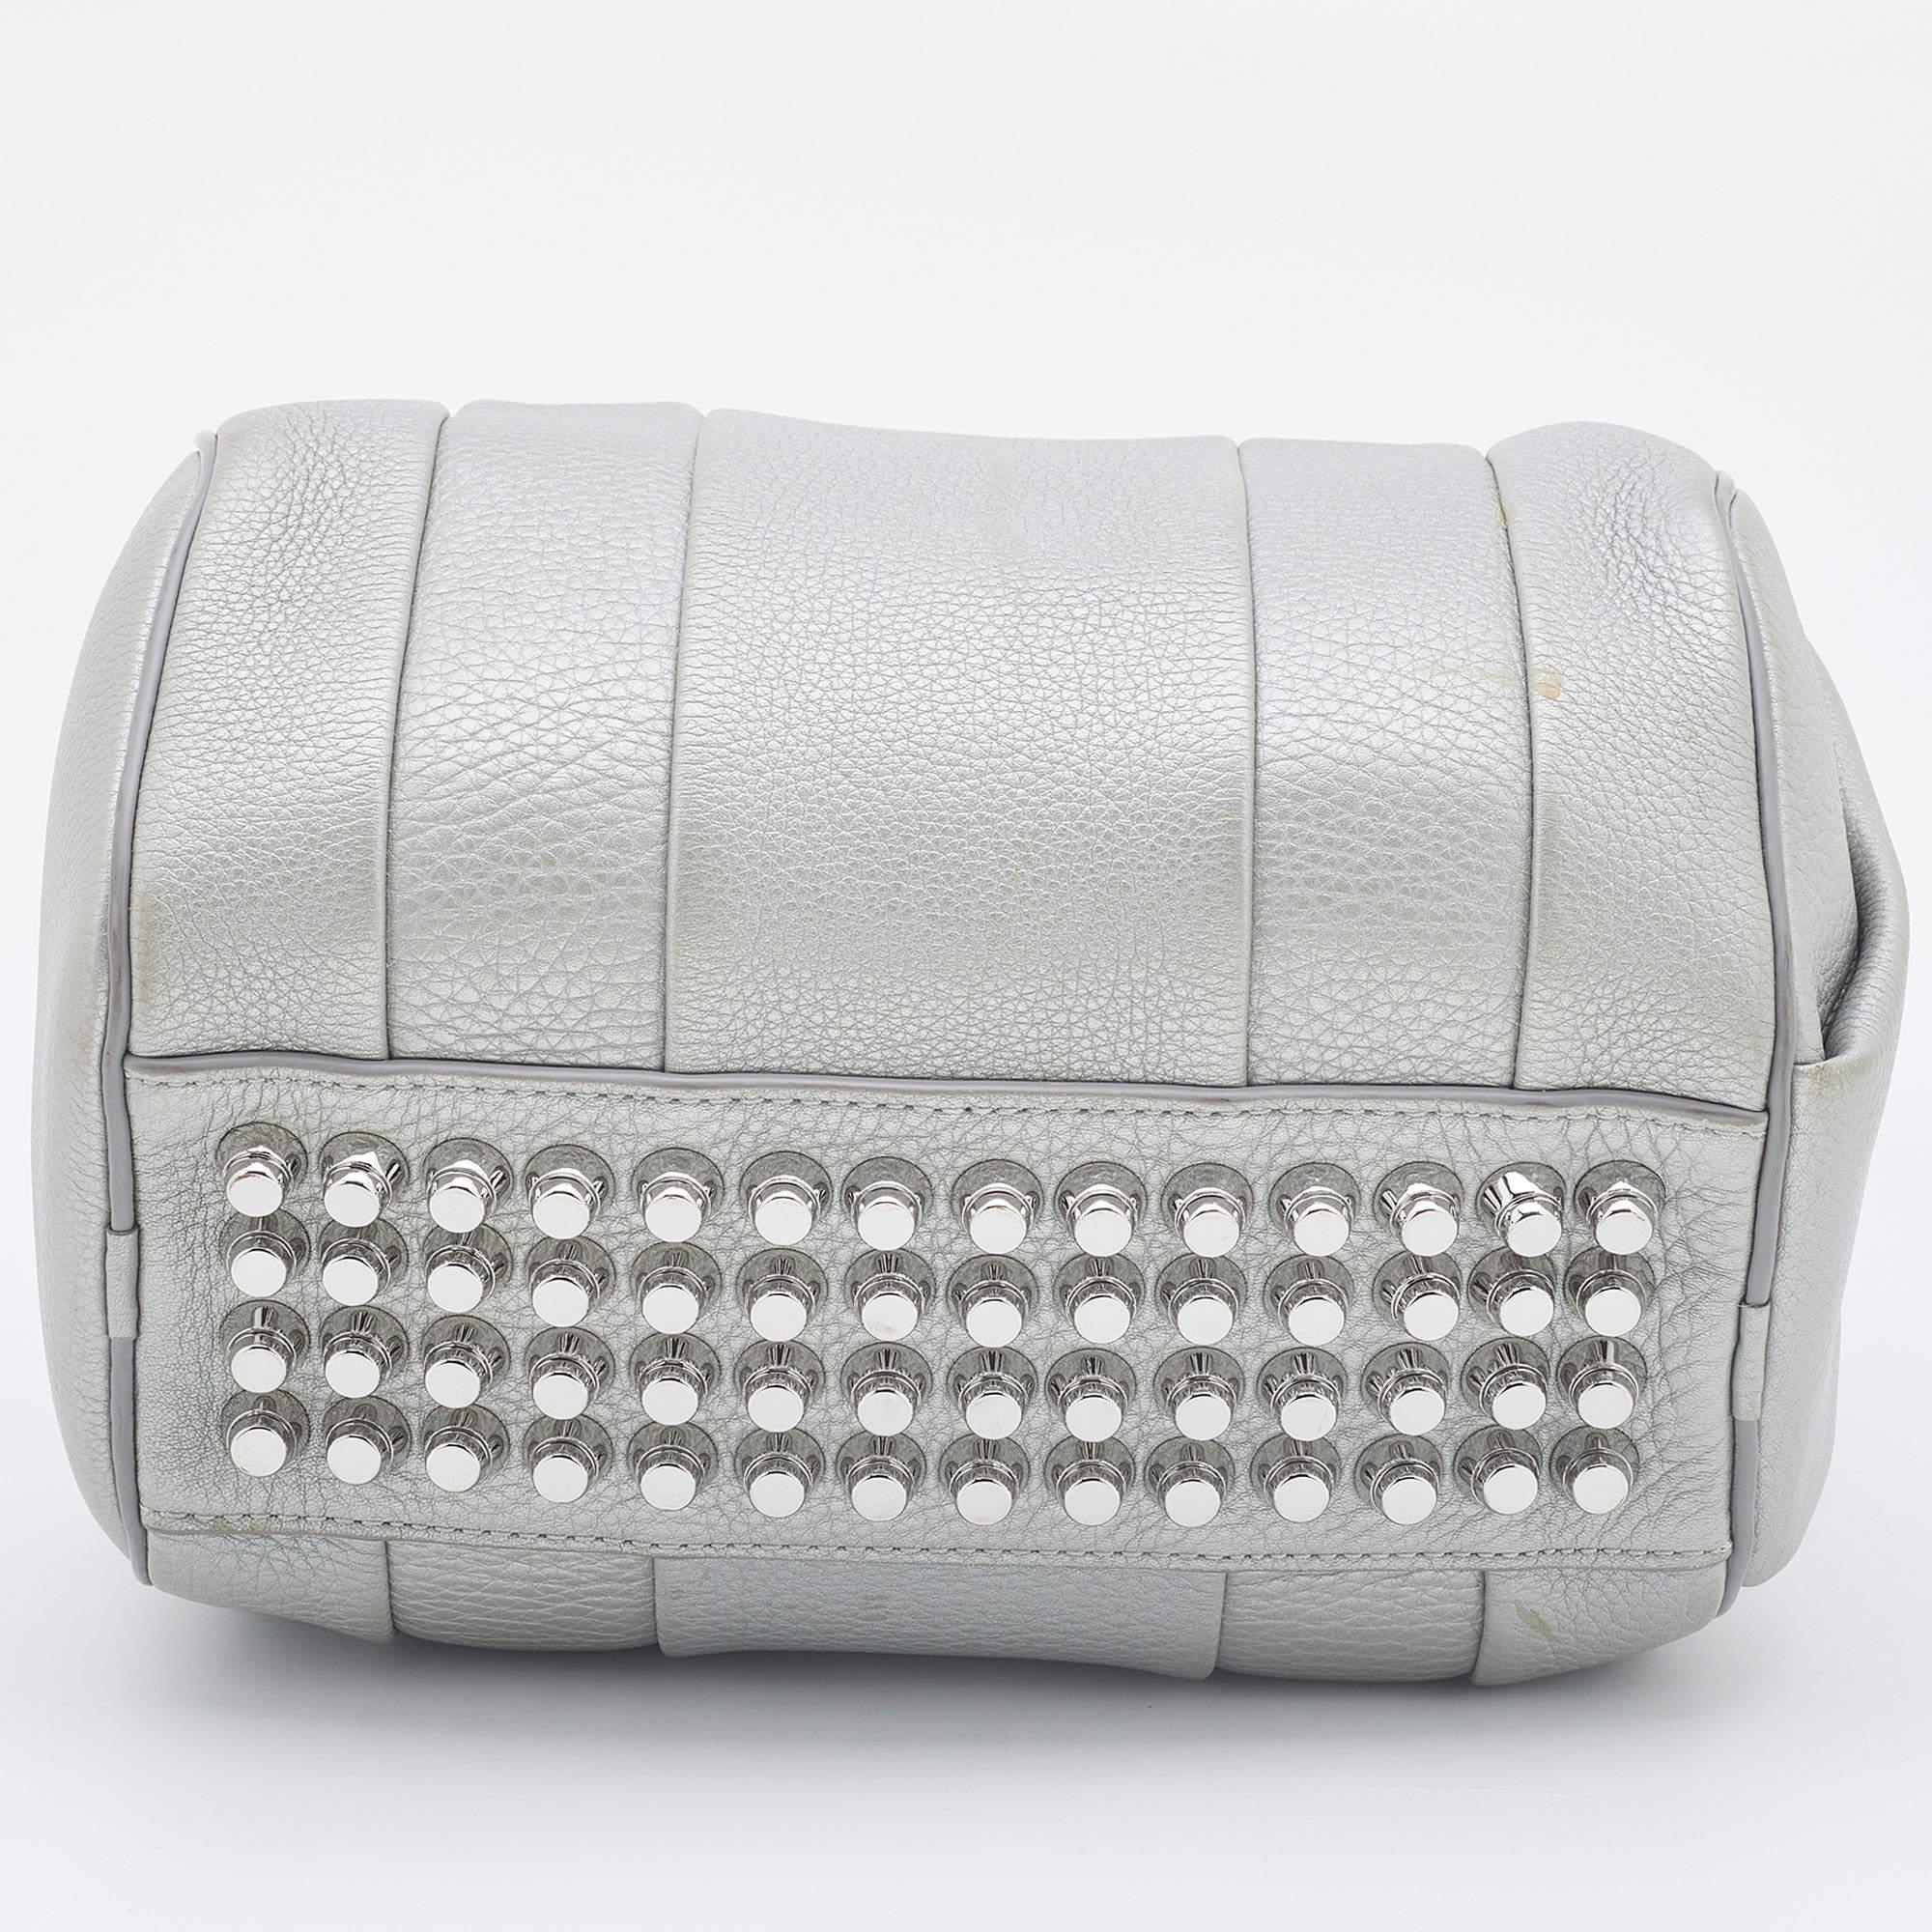 Alexander Wang Silver Textured Leather Rocco Bag 1